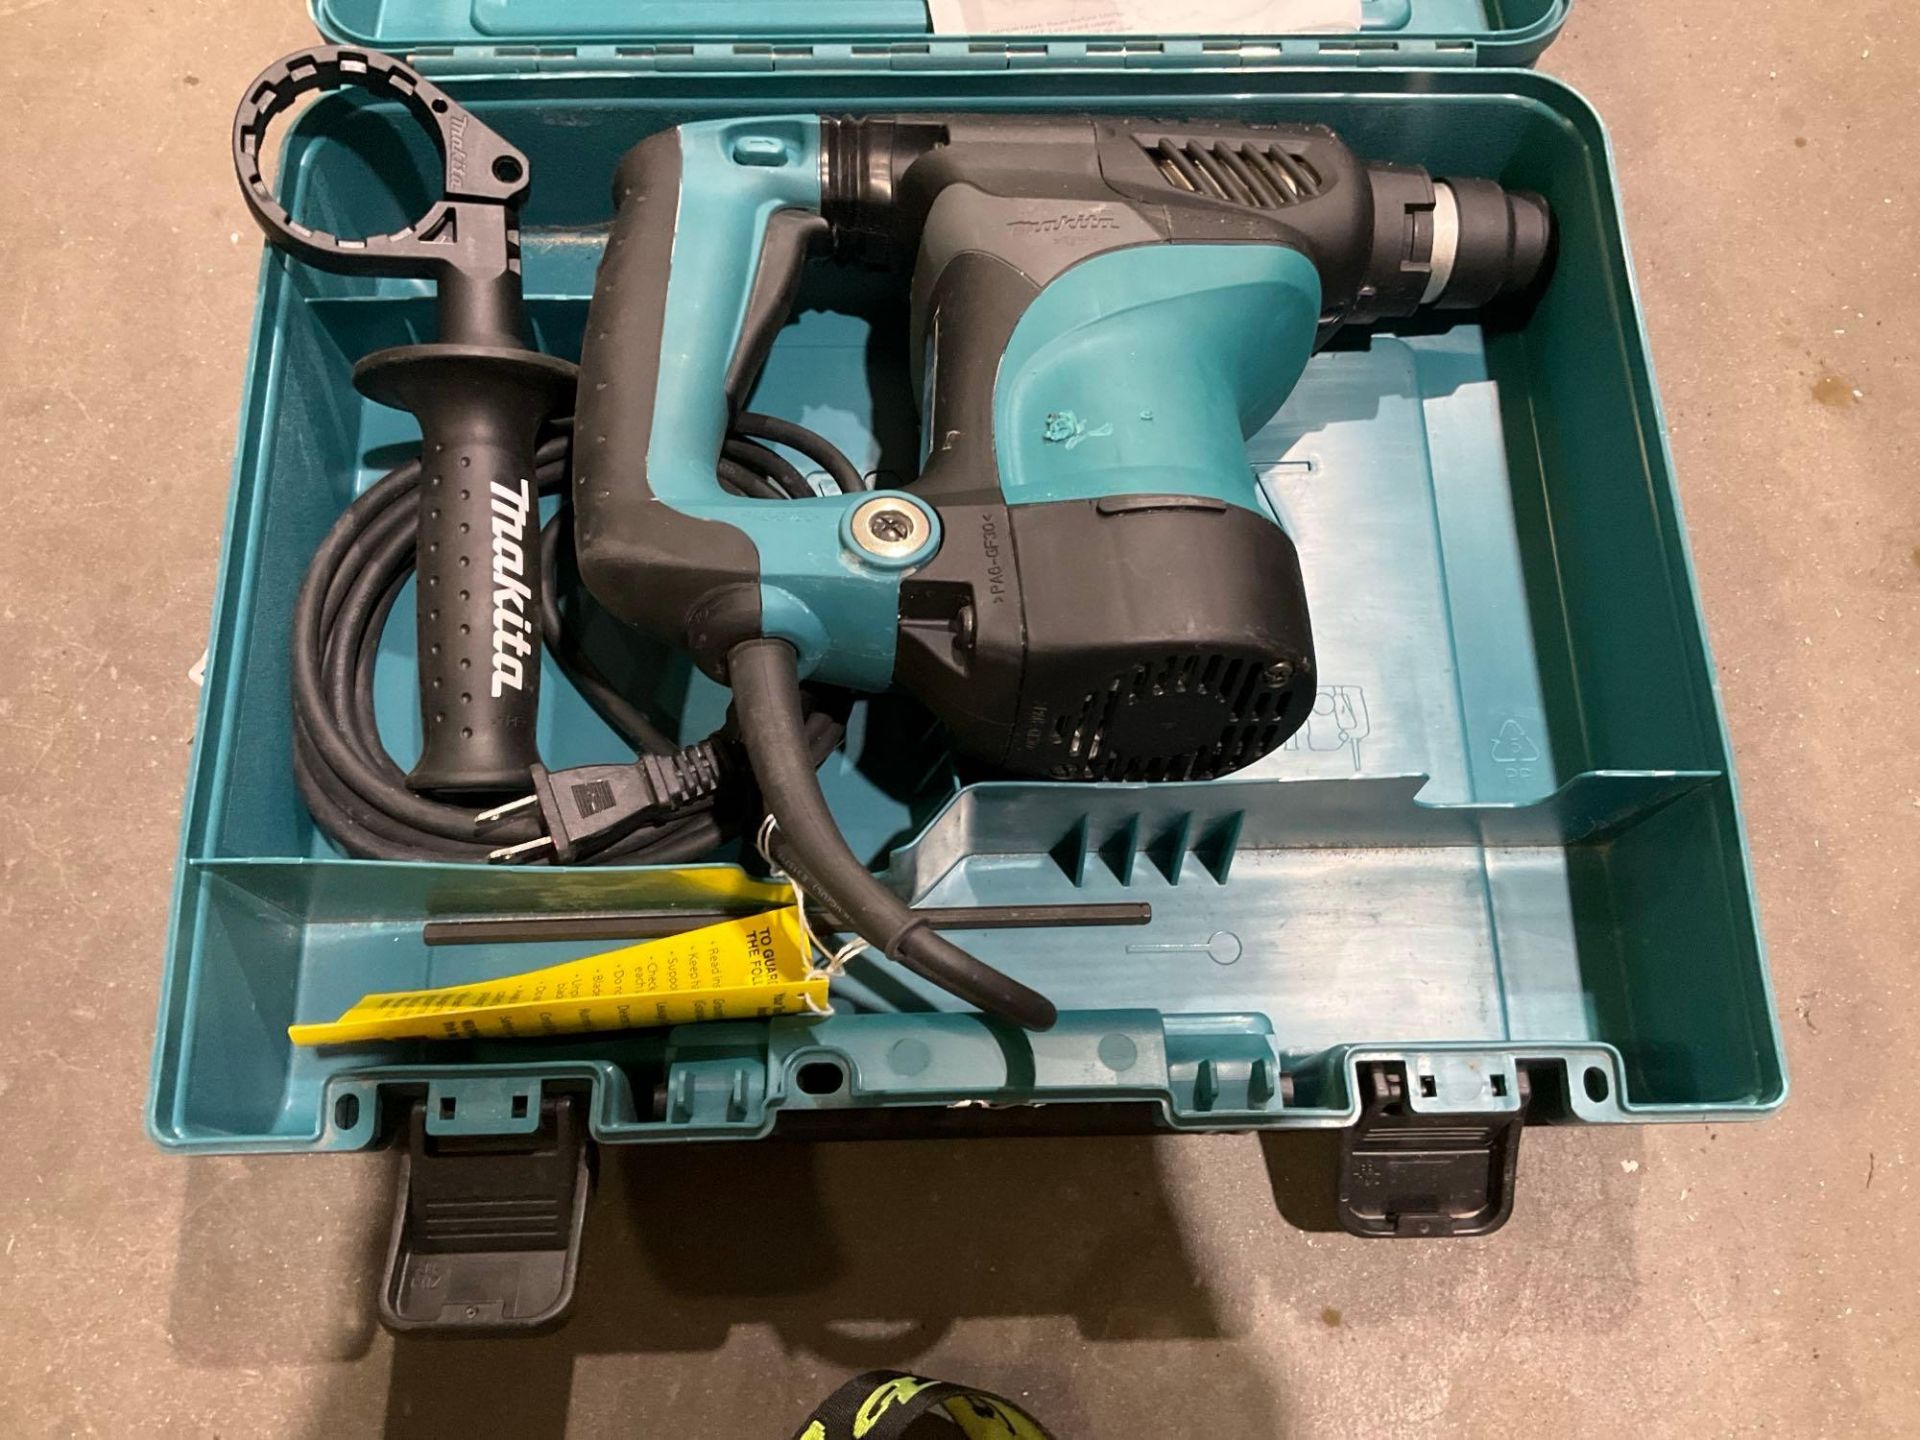 MAKITA ROTARY HAMMER MODEL HR2811F IN CARRYING CASE, RECONDITIONED - Image 2 of 5